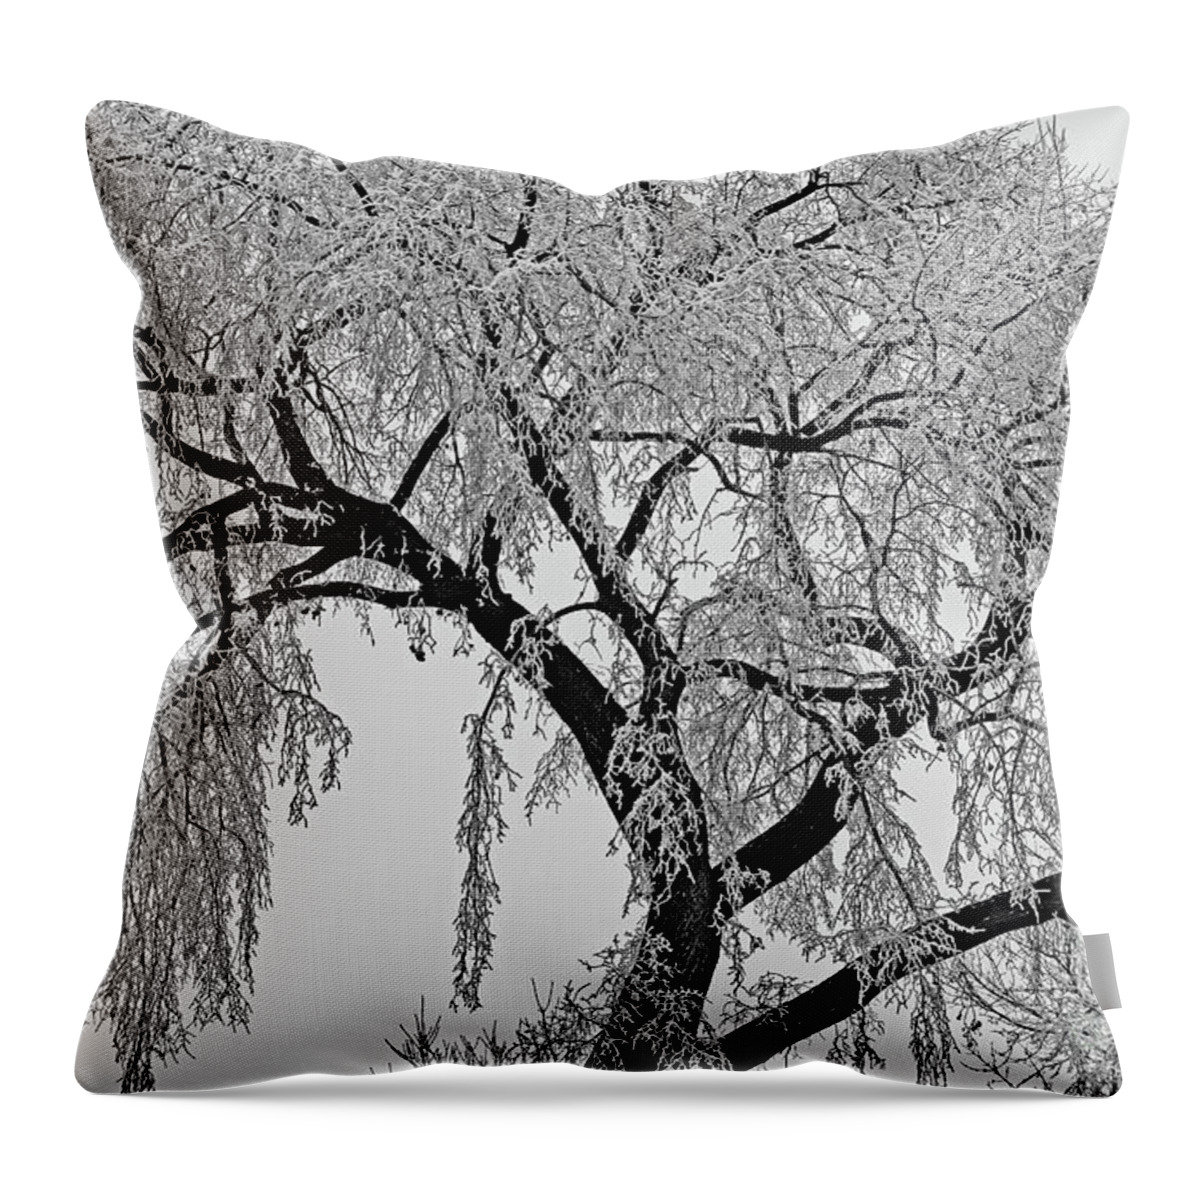  Throw Pillow featuring the digital art Frosty Friday by Darcy Dietrich